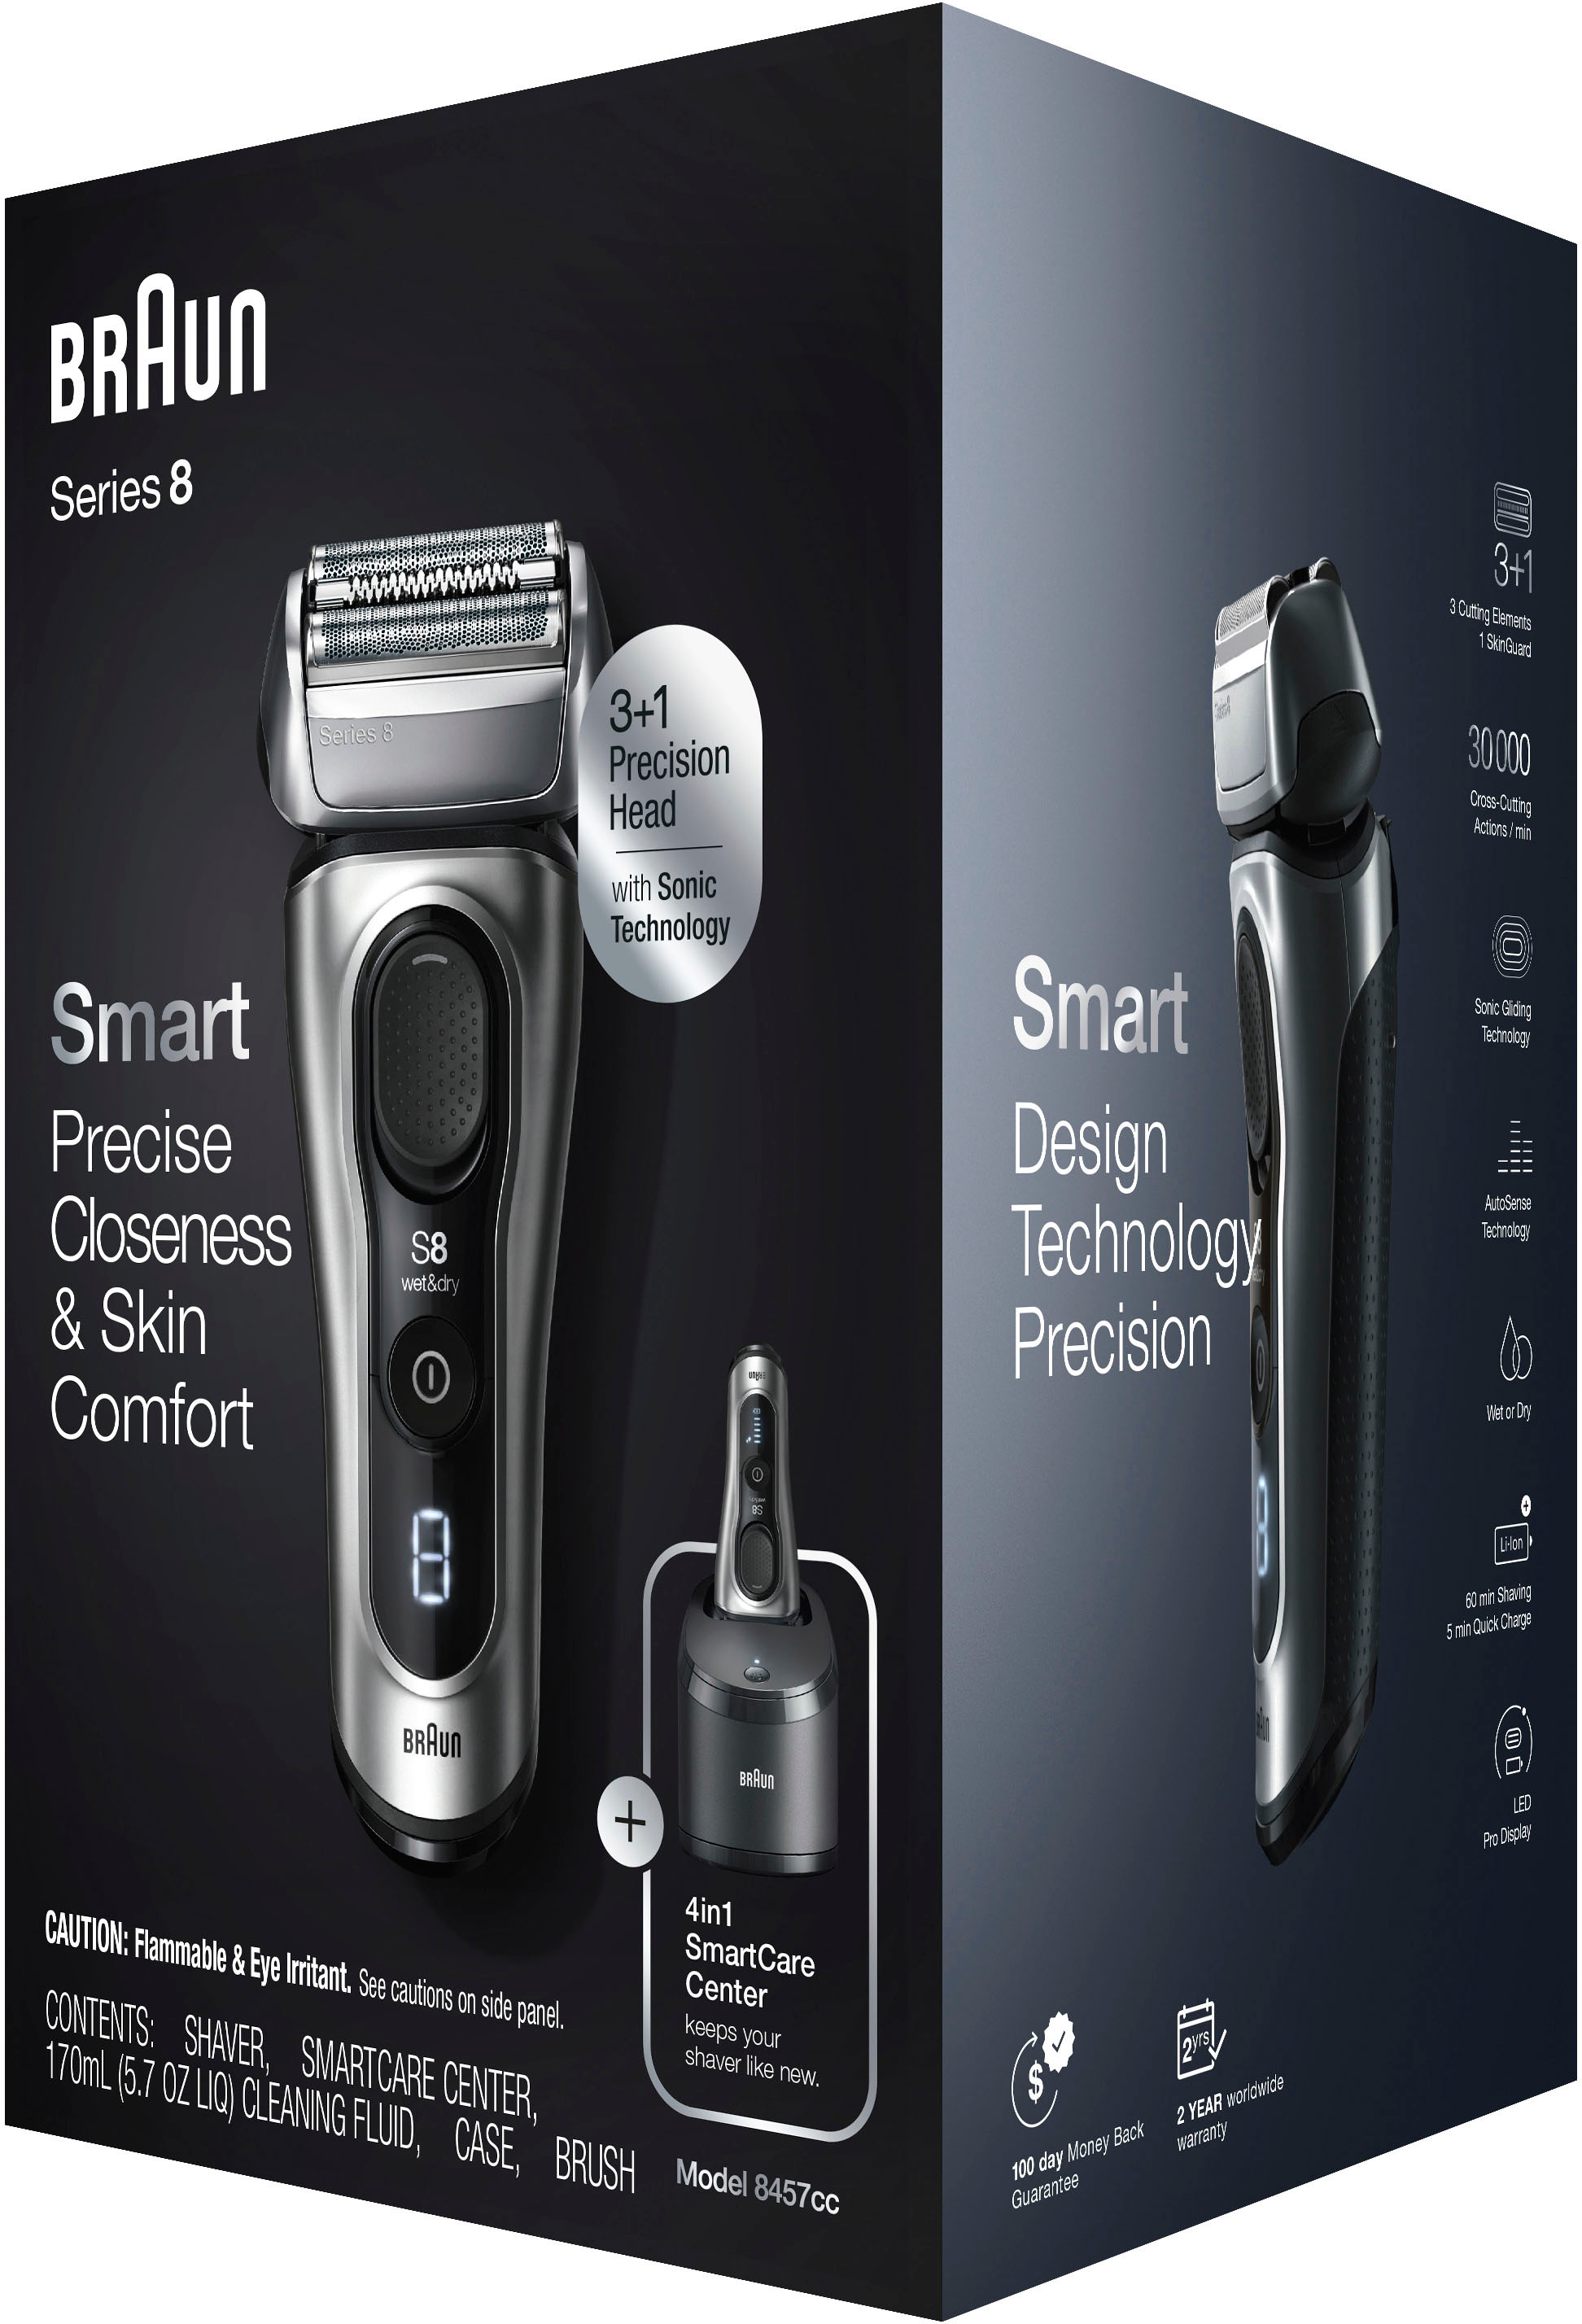 Series 8 8417s Wet & Dry shaver with charging stand and travel case, silver.